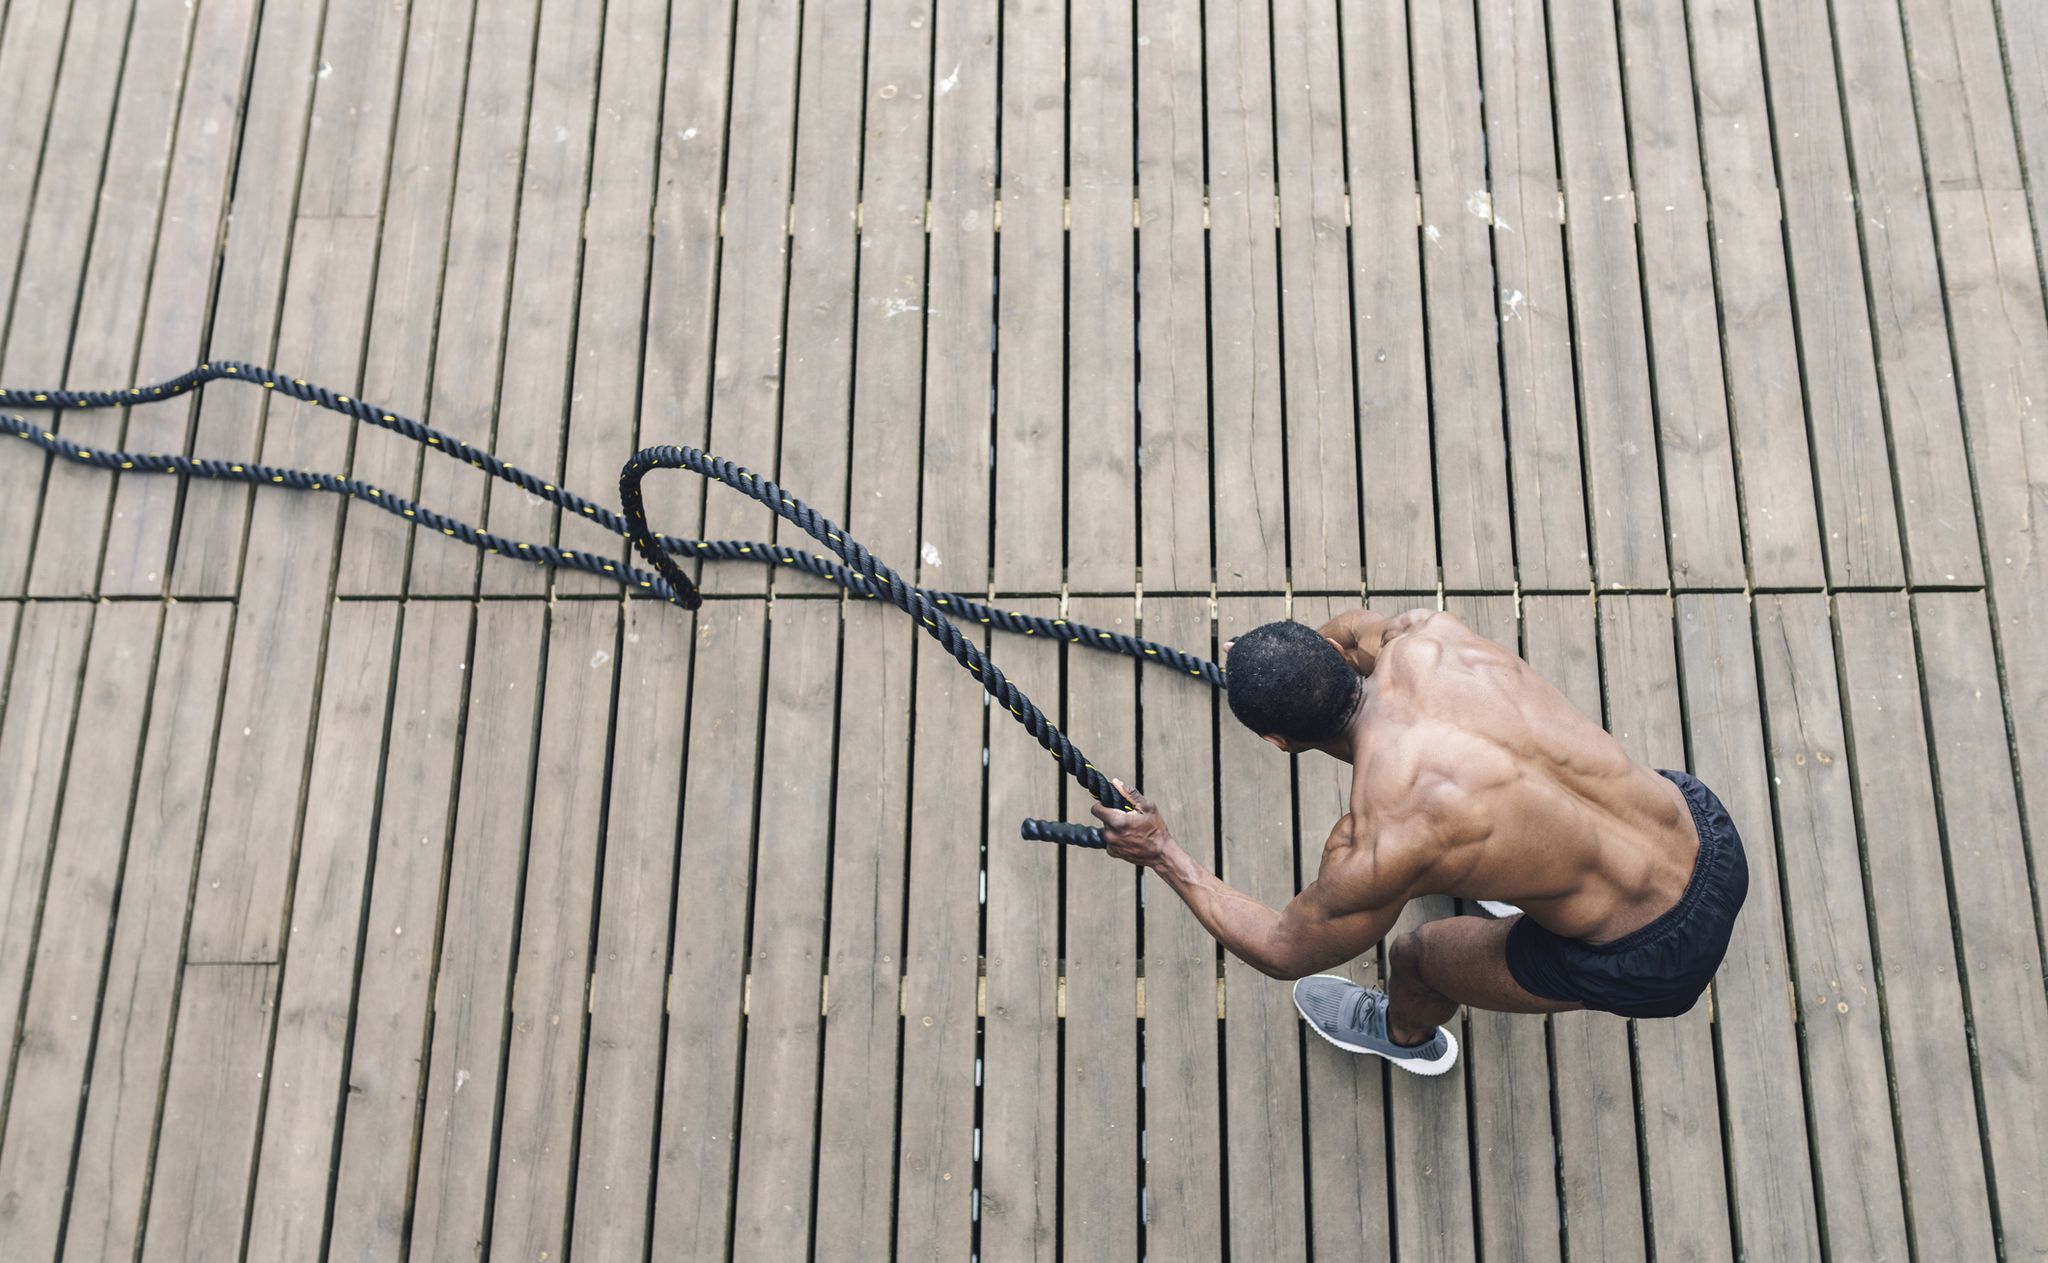 Get Battle Ropes and Uplift Your Cardio and Strength Training –